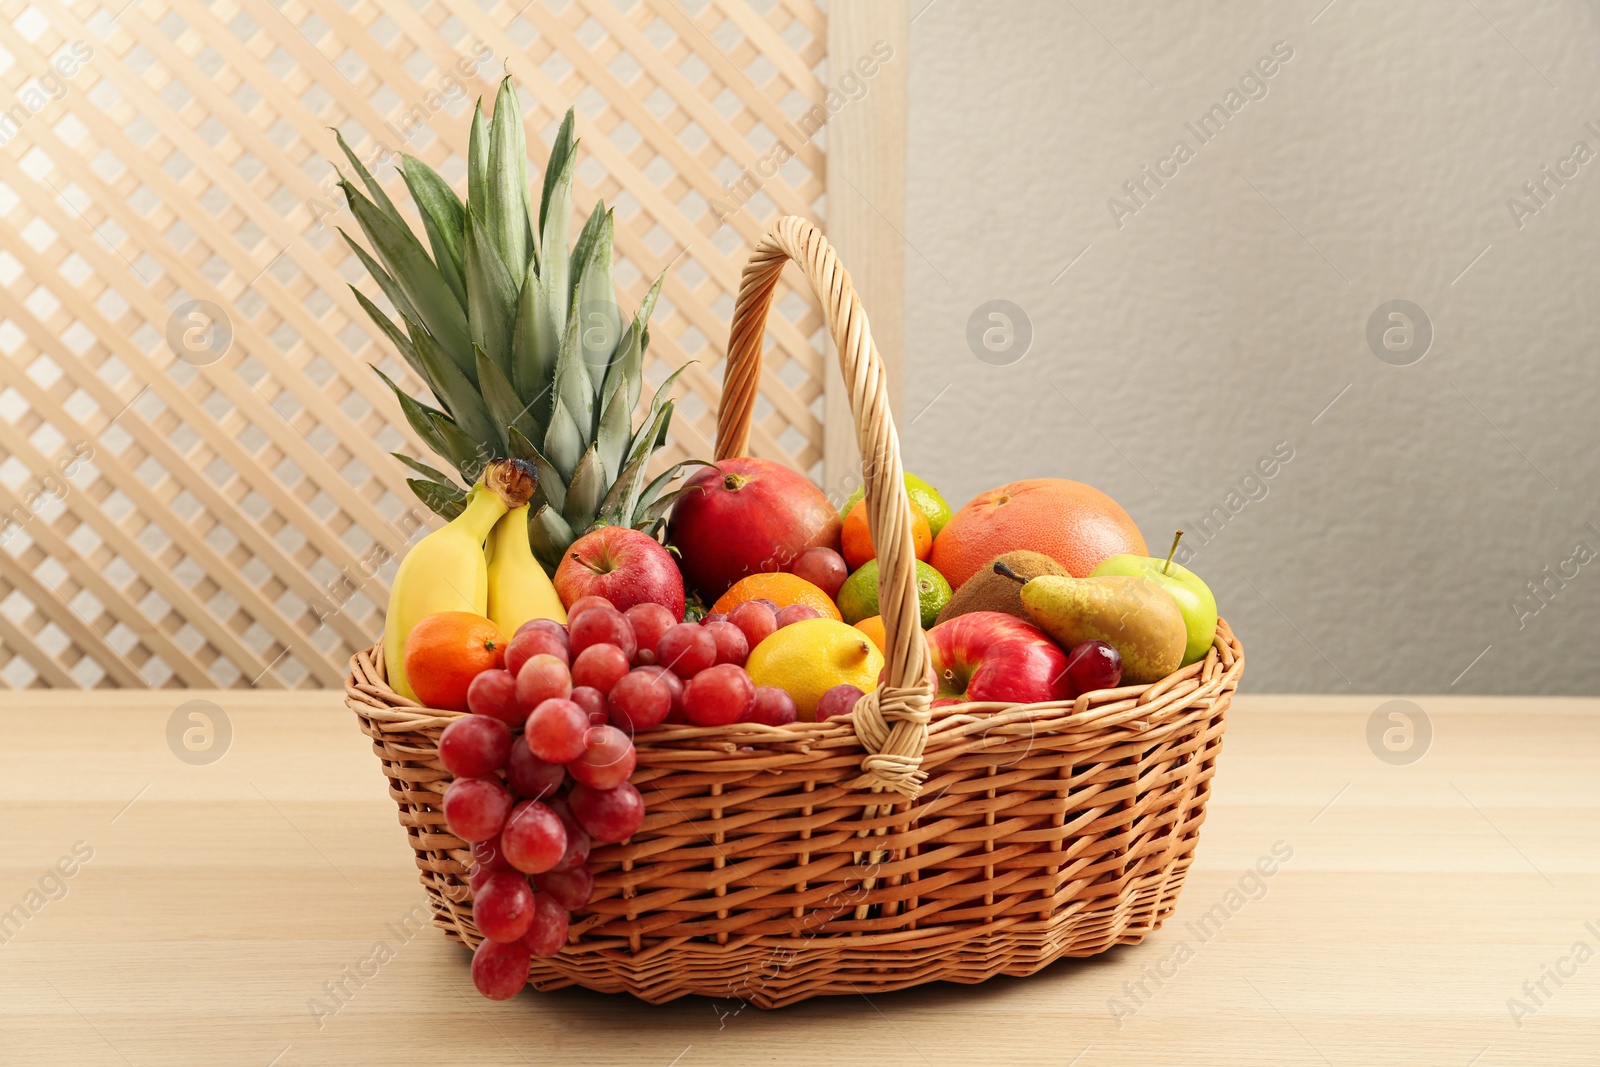 Photo of Wicker basket with different fresh fruits on wooden table